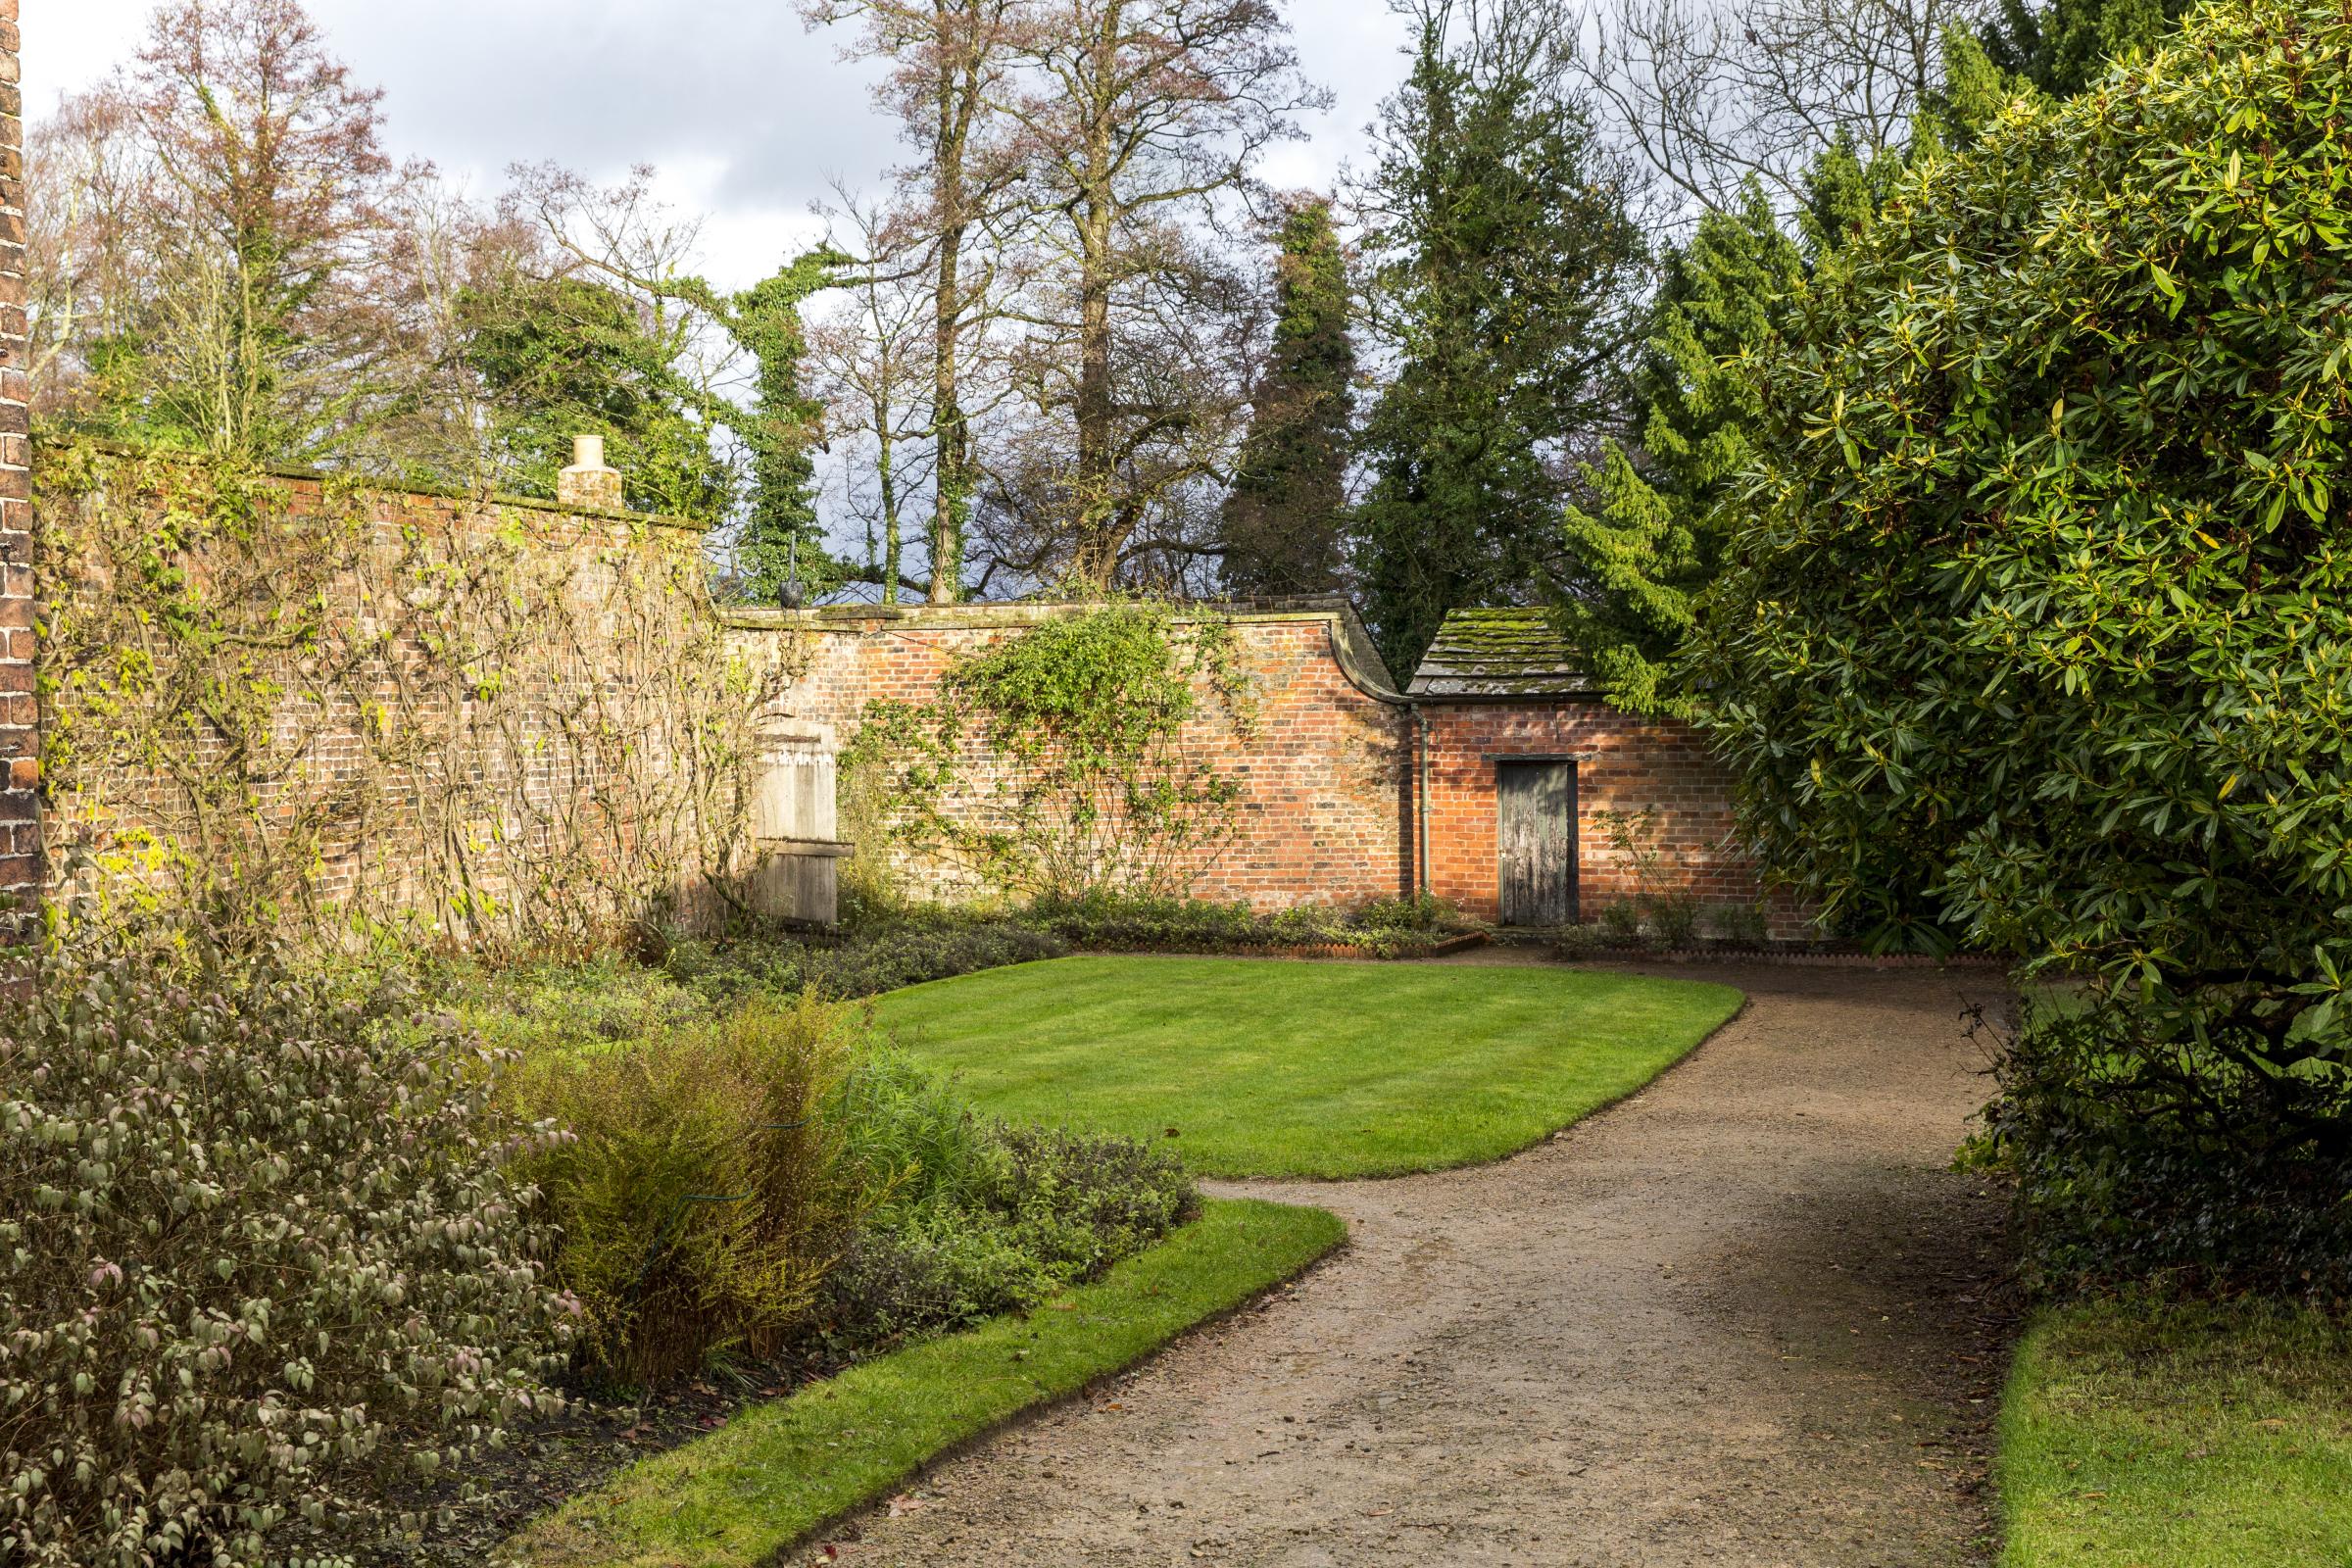 Rufford Old Hall (National Trust Images - Annpurna Mellor)